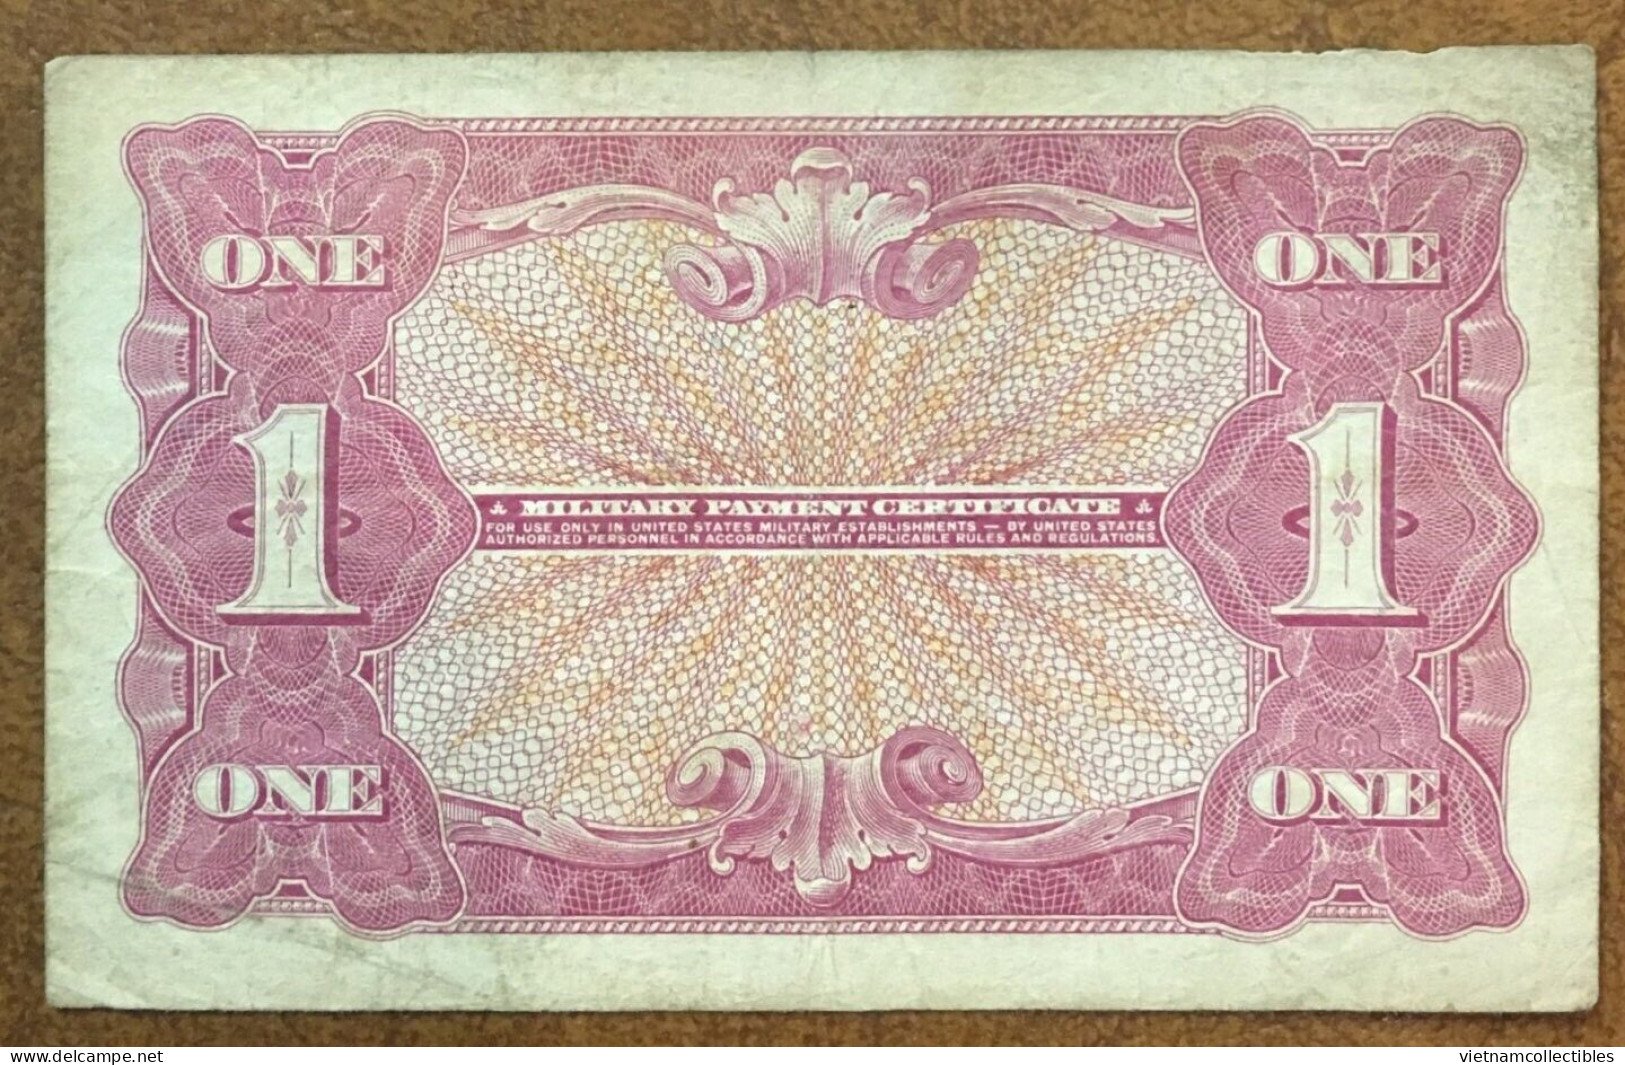 USA MPC One Dollar Military Payment Series 641 VF Banknote Note 1964 Using In Vietnam Viet Nam - Plate # 17 / 2 Photos - 1965-1968 - Serie 641